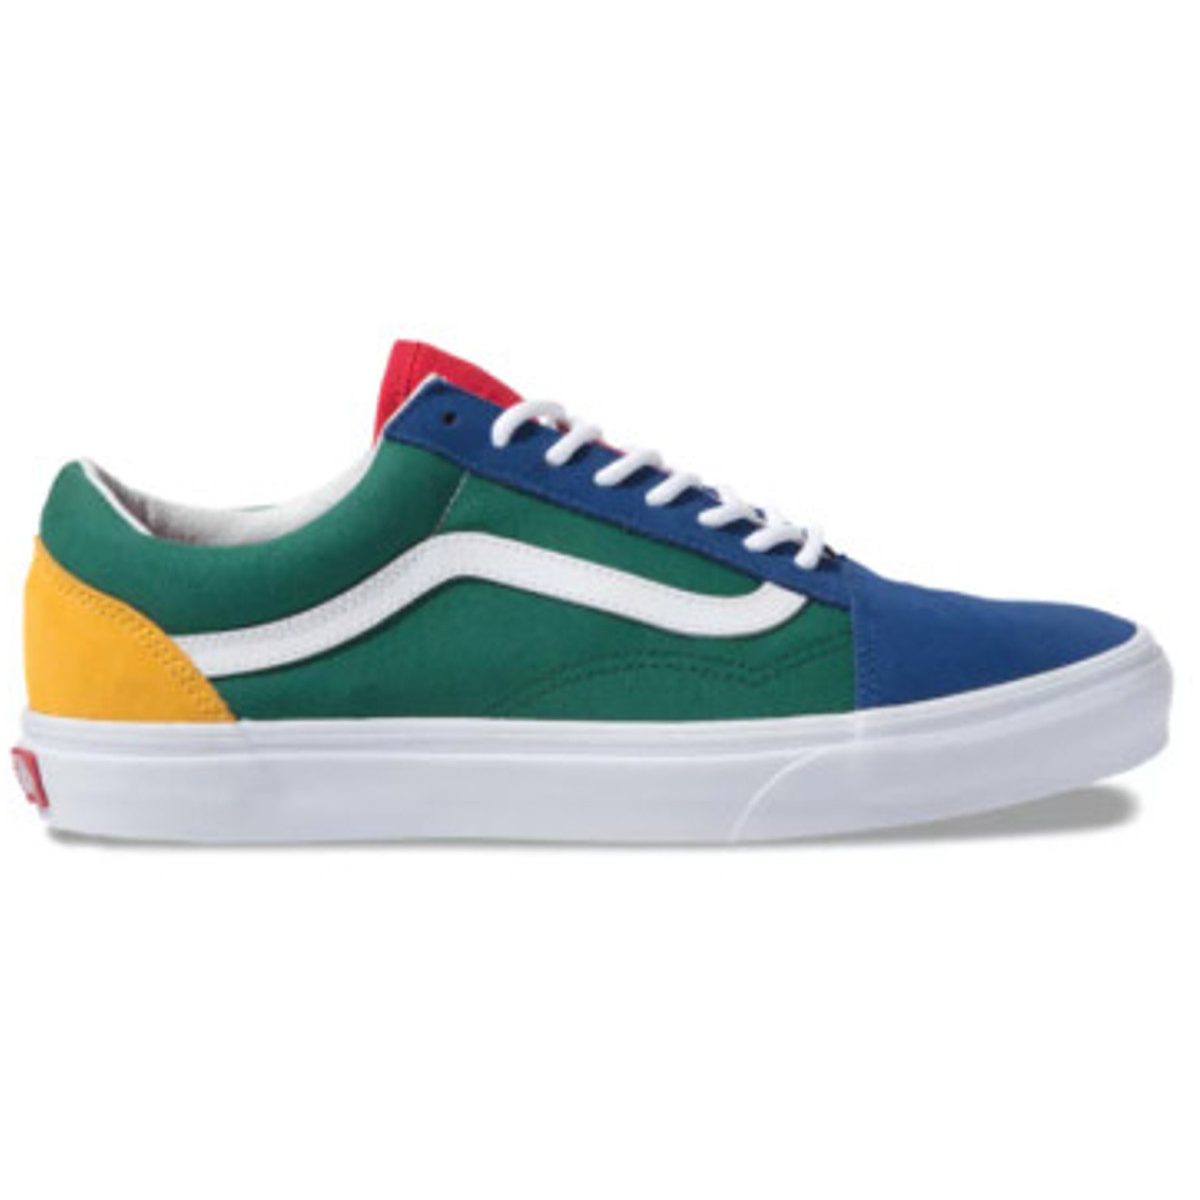 Vans Men's Yacht Club Old Skool Shoes - Blue Green / Red / — Just Sports